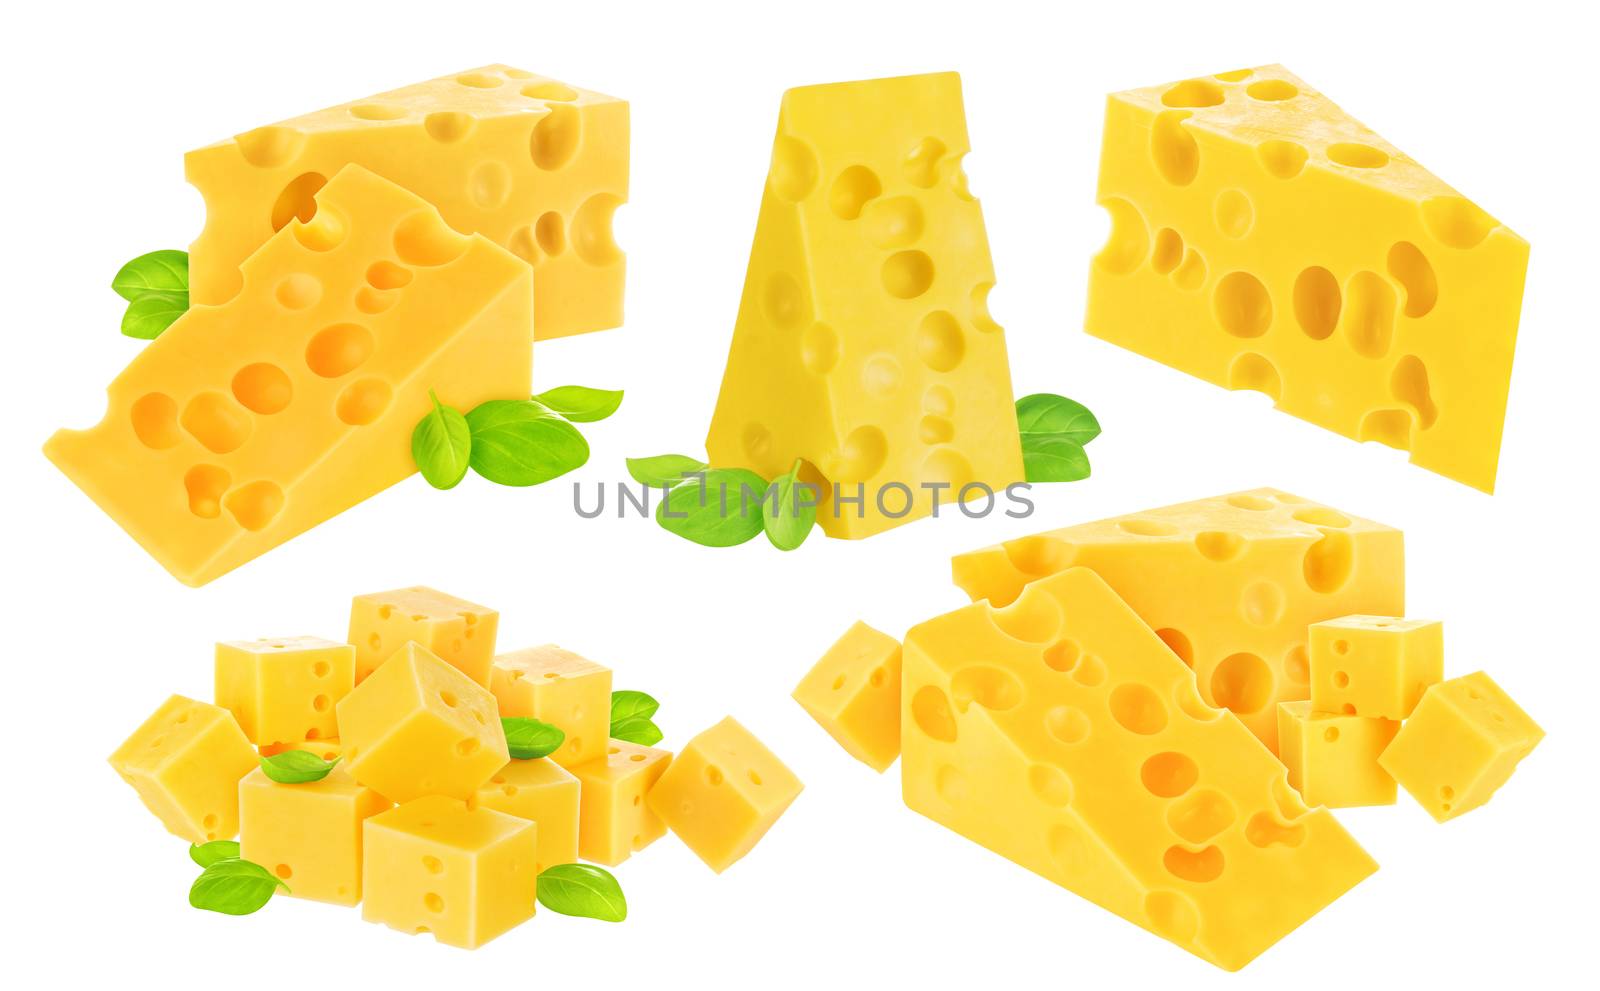 Cheese isolated on white background with clipping path. Collection.